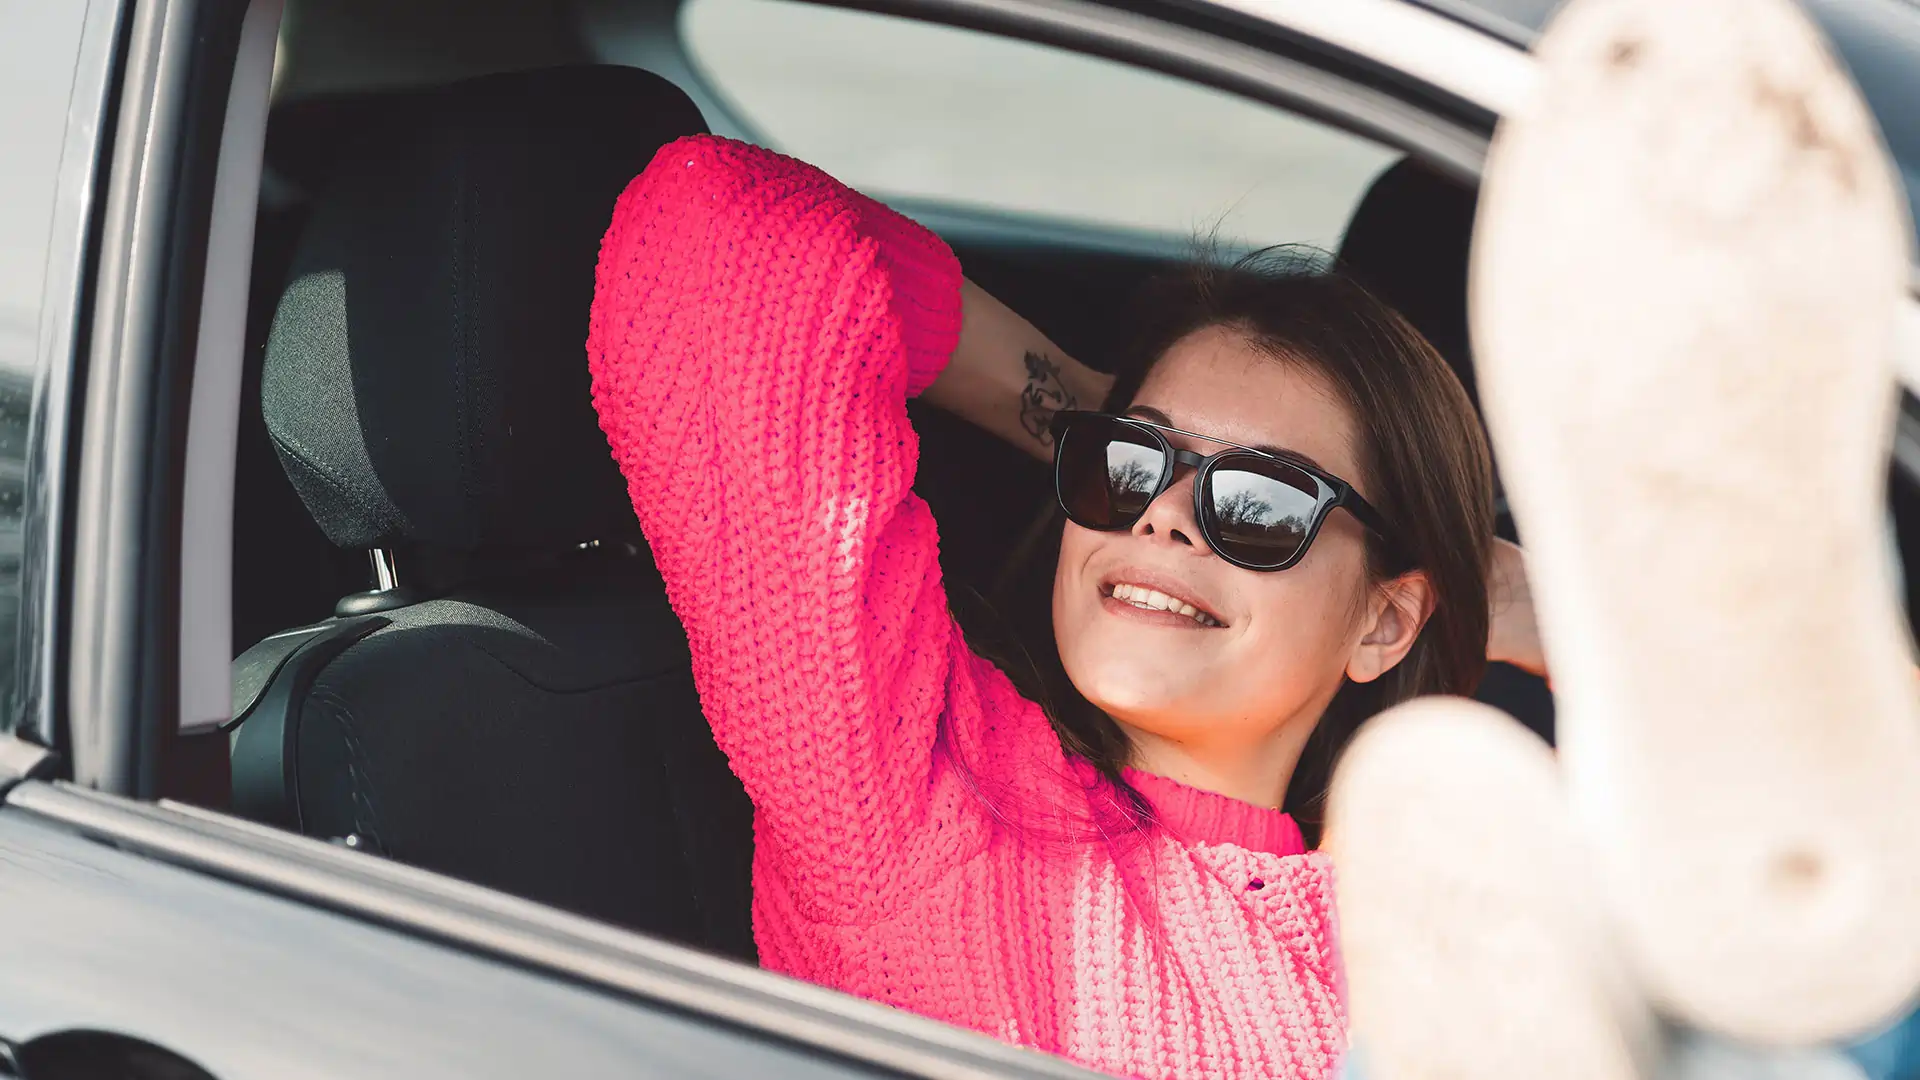 woman wearing sunglasses smiling while sitting in passenger seat of car with feet out the window